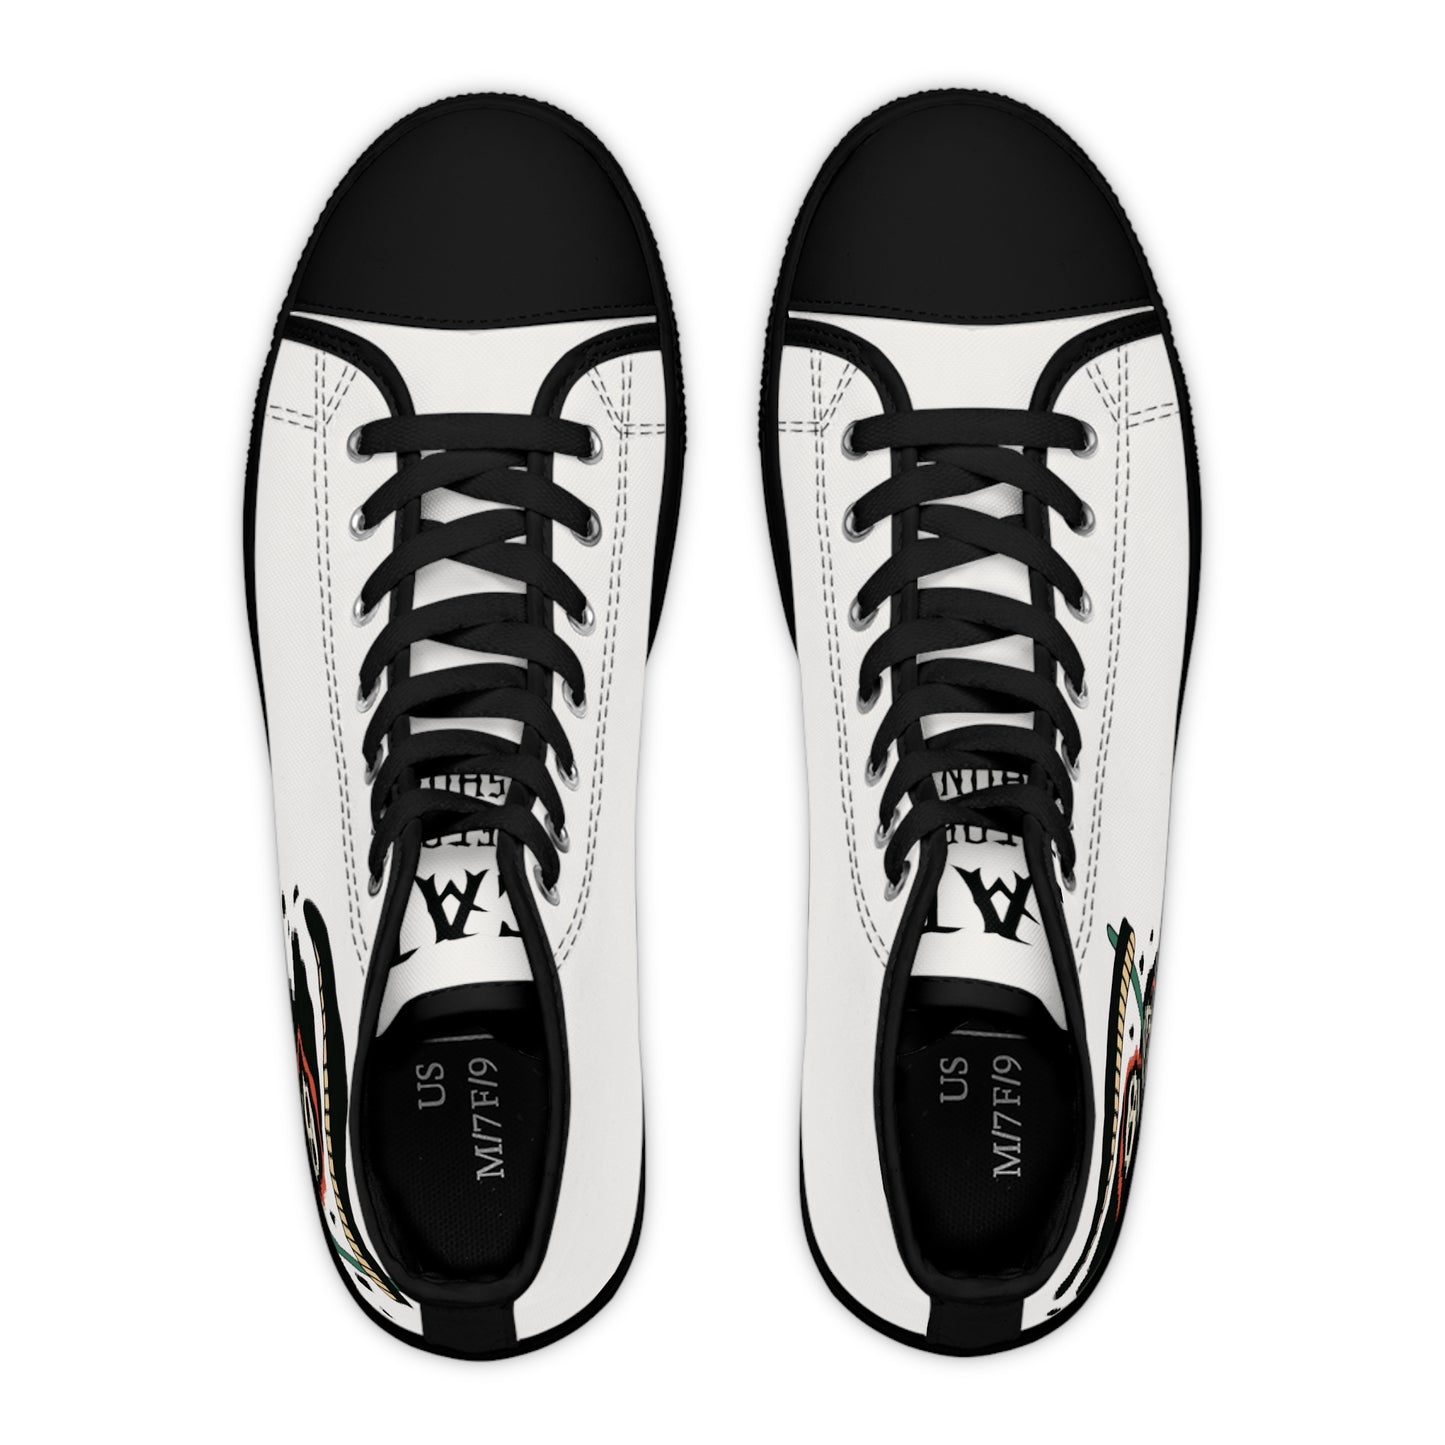 Death before dishonor Women's High Top Sneakers